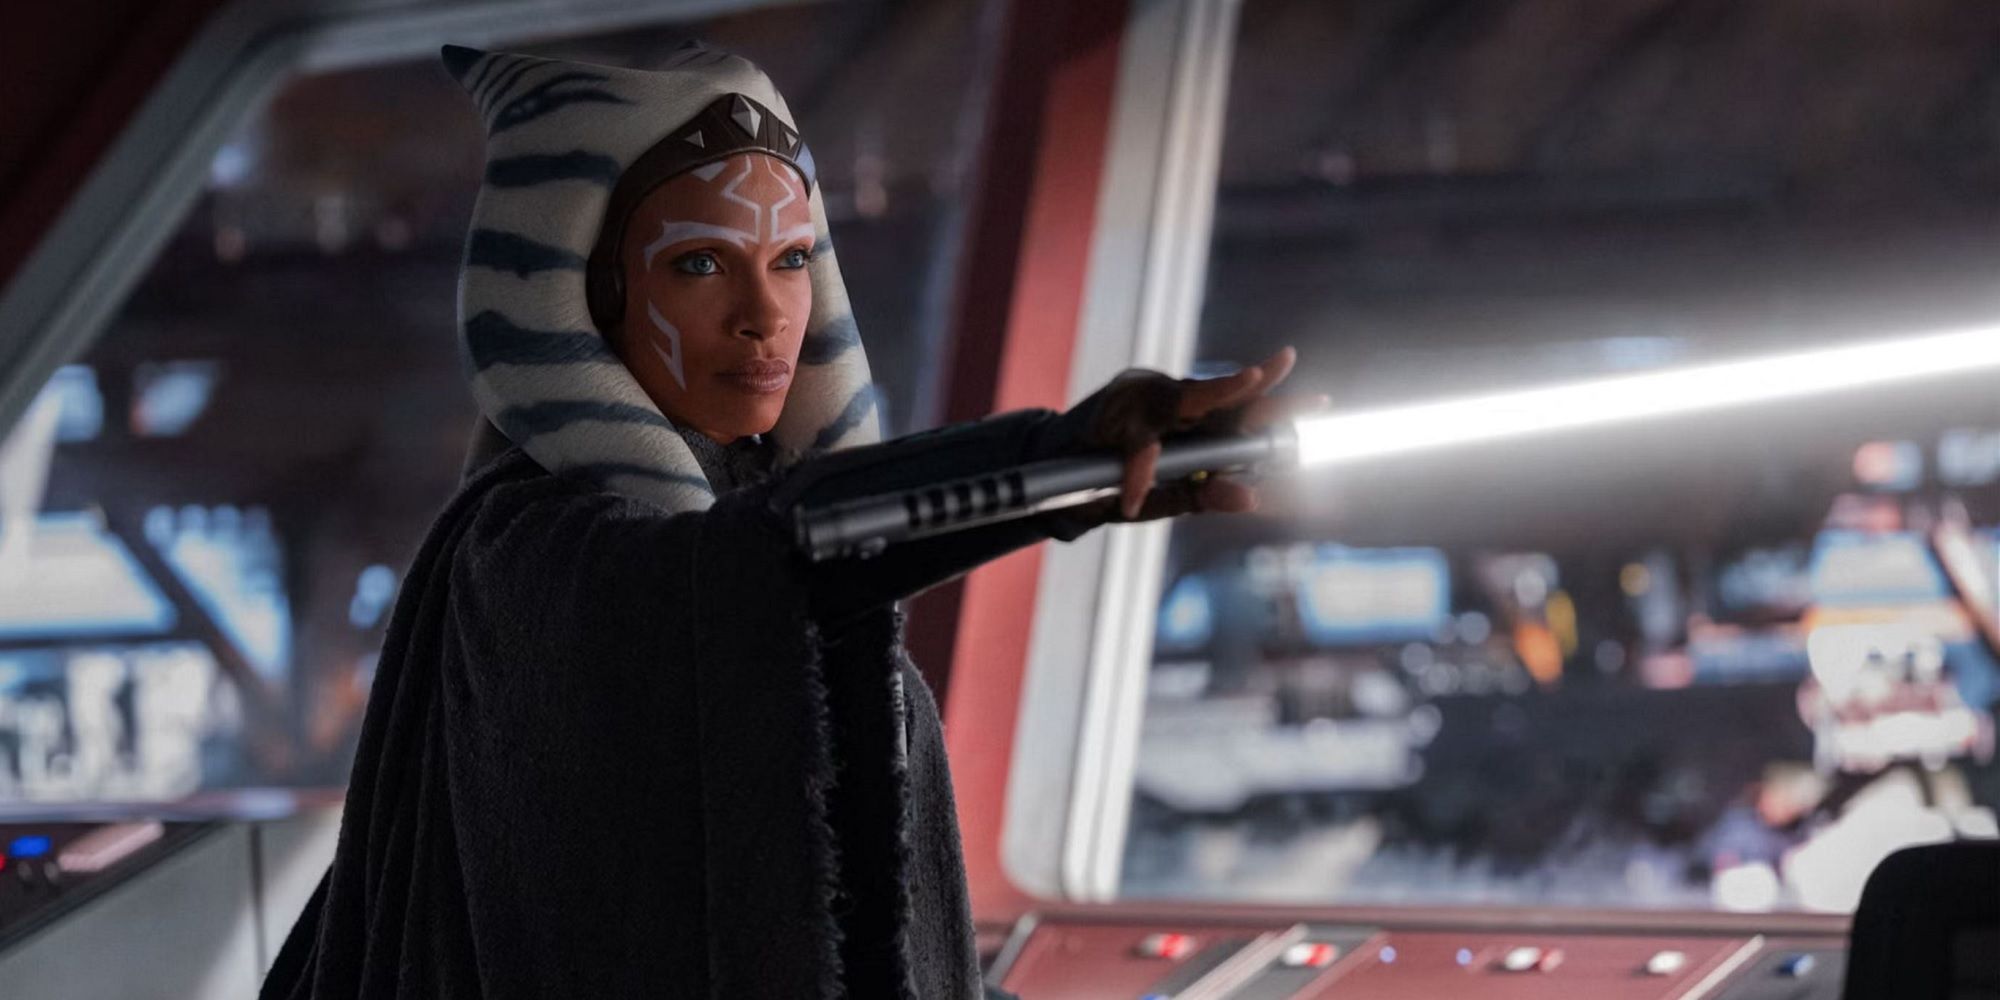 Ahsoka Tano (played by actor Rosario Dawson) points a white lightsaber inside a spaceship